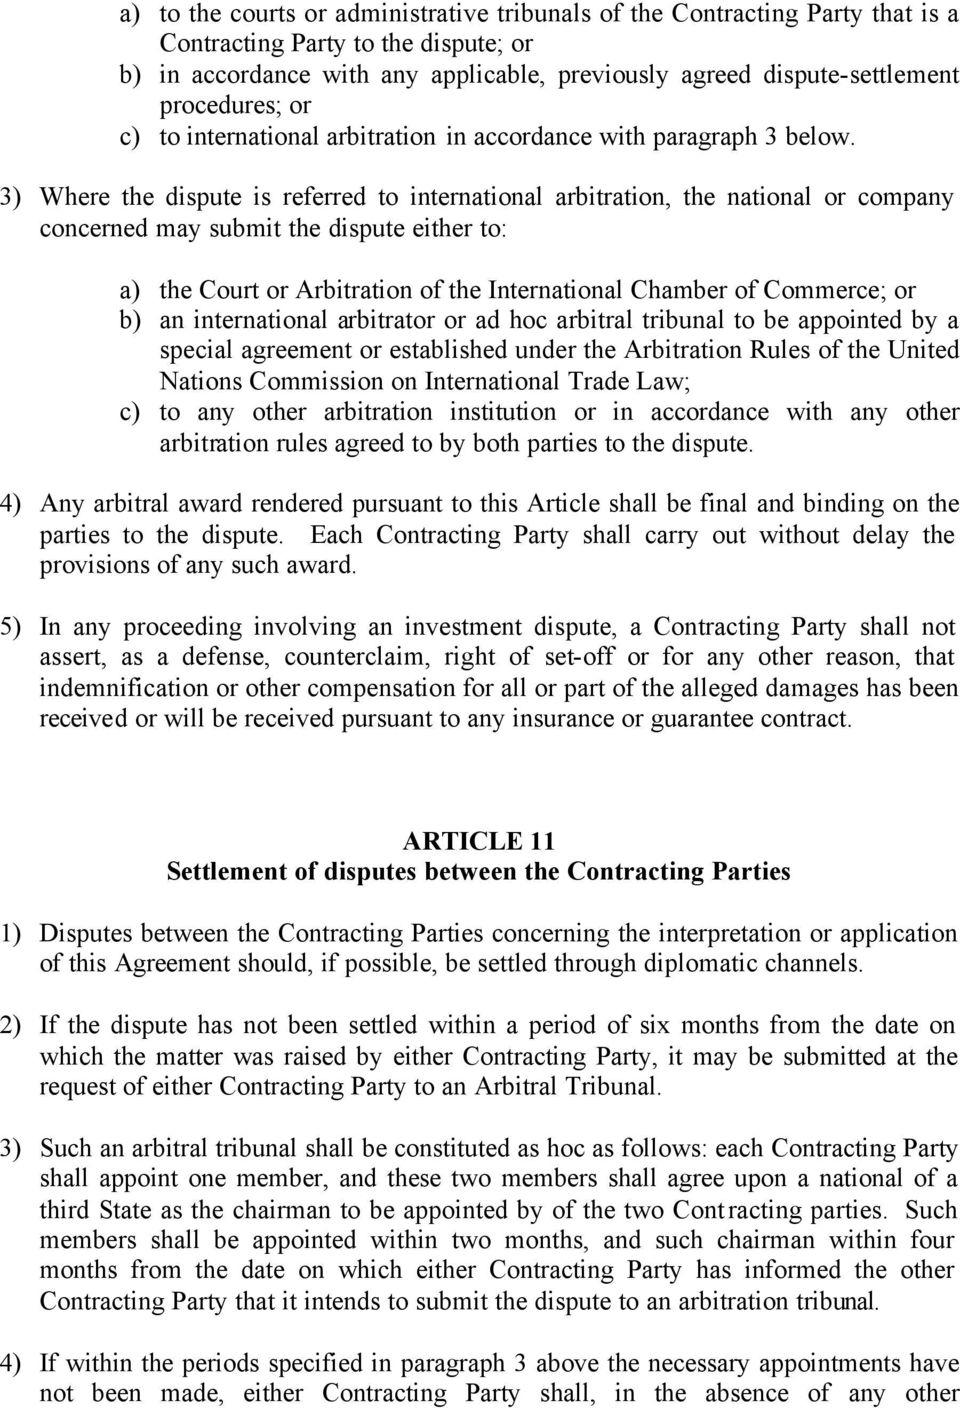 3) Where the dispute is referred to international arbitration, the national or company concerned may submit the dispute either to: a) the Court or Arbitration of the International Chamber of